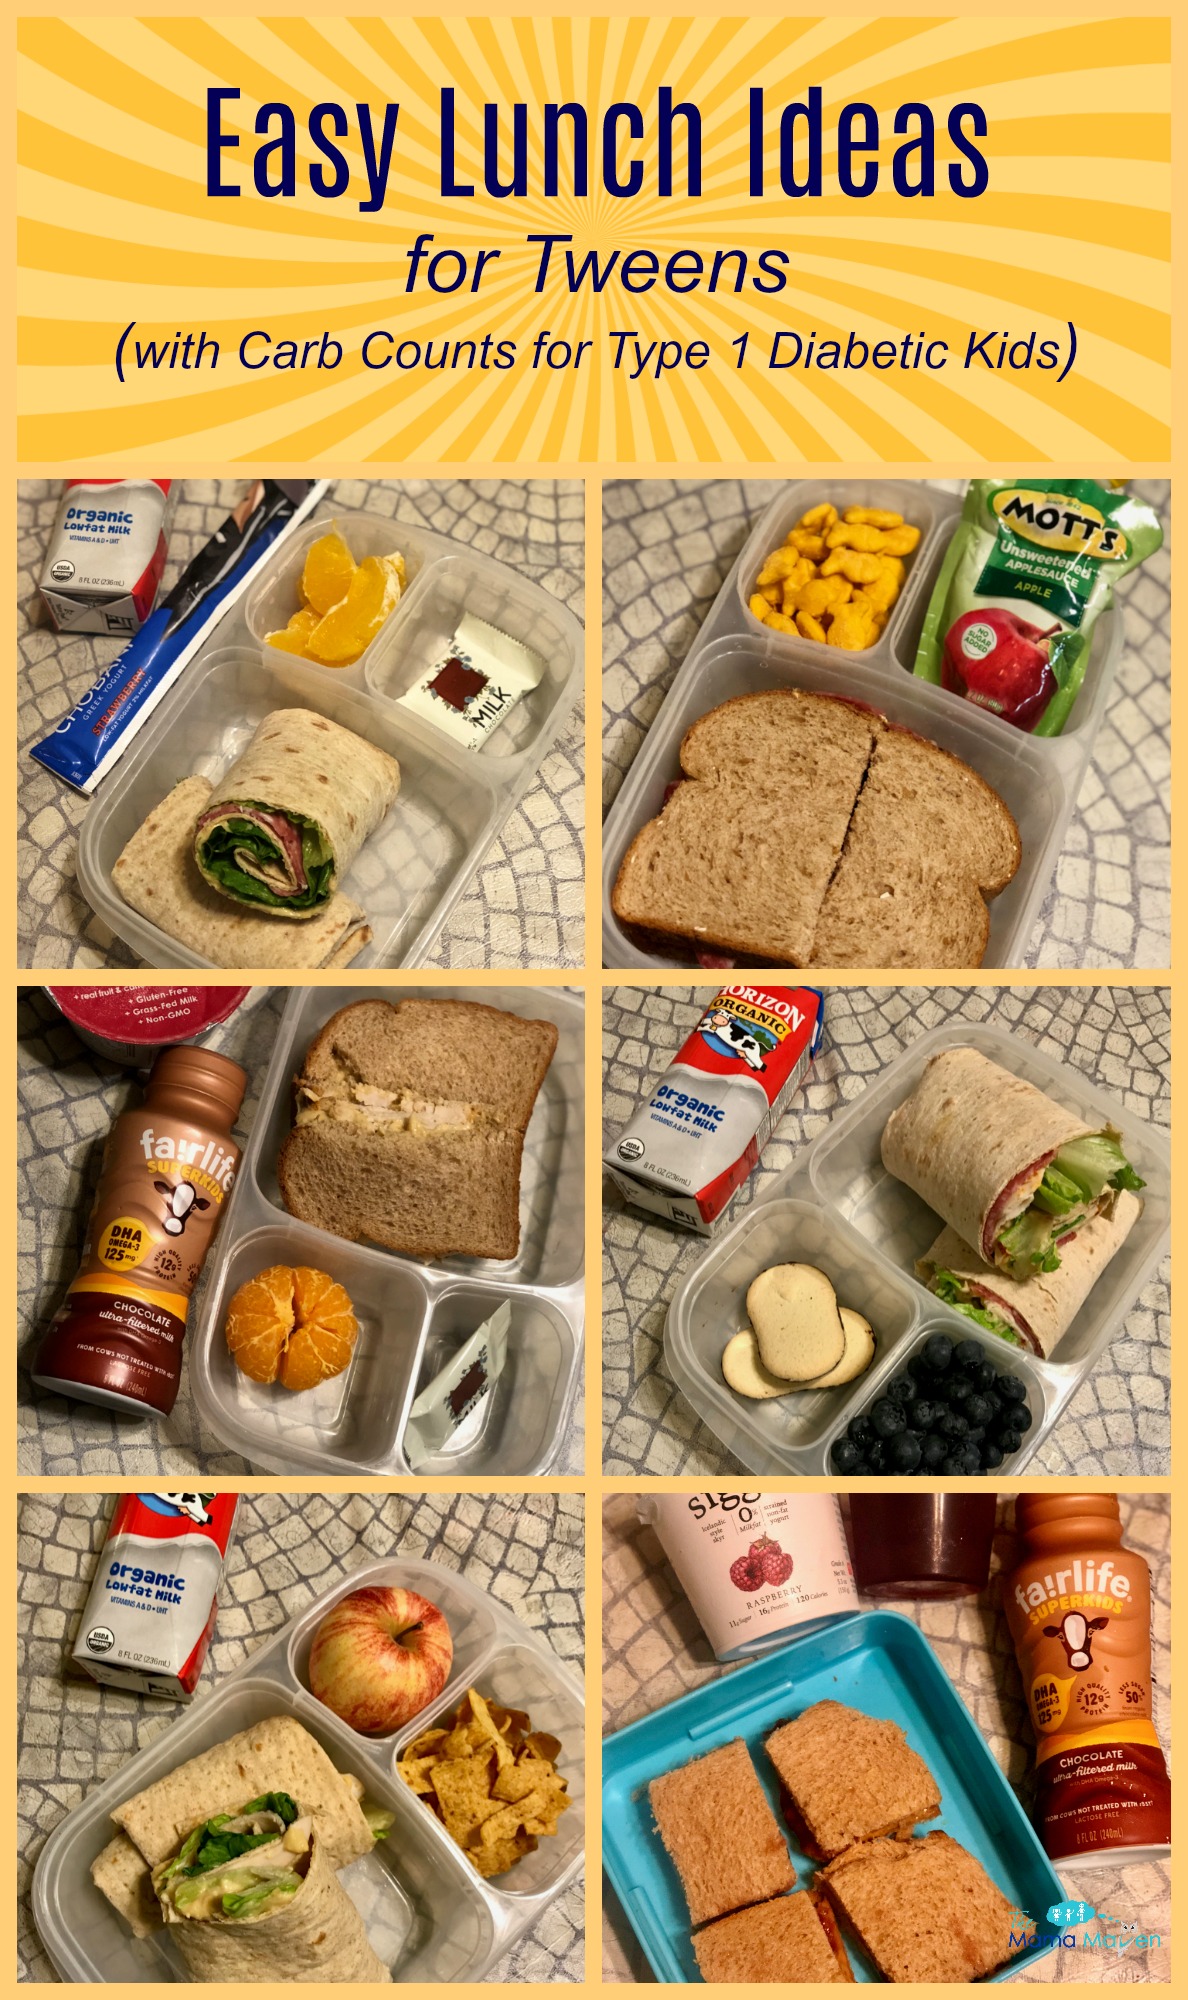 Easy Lunch Ideas for Tweens (with Carb Counts for Type 1 Diabetic Kids)